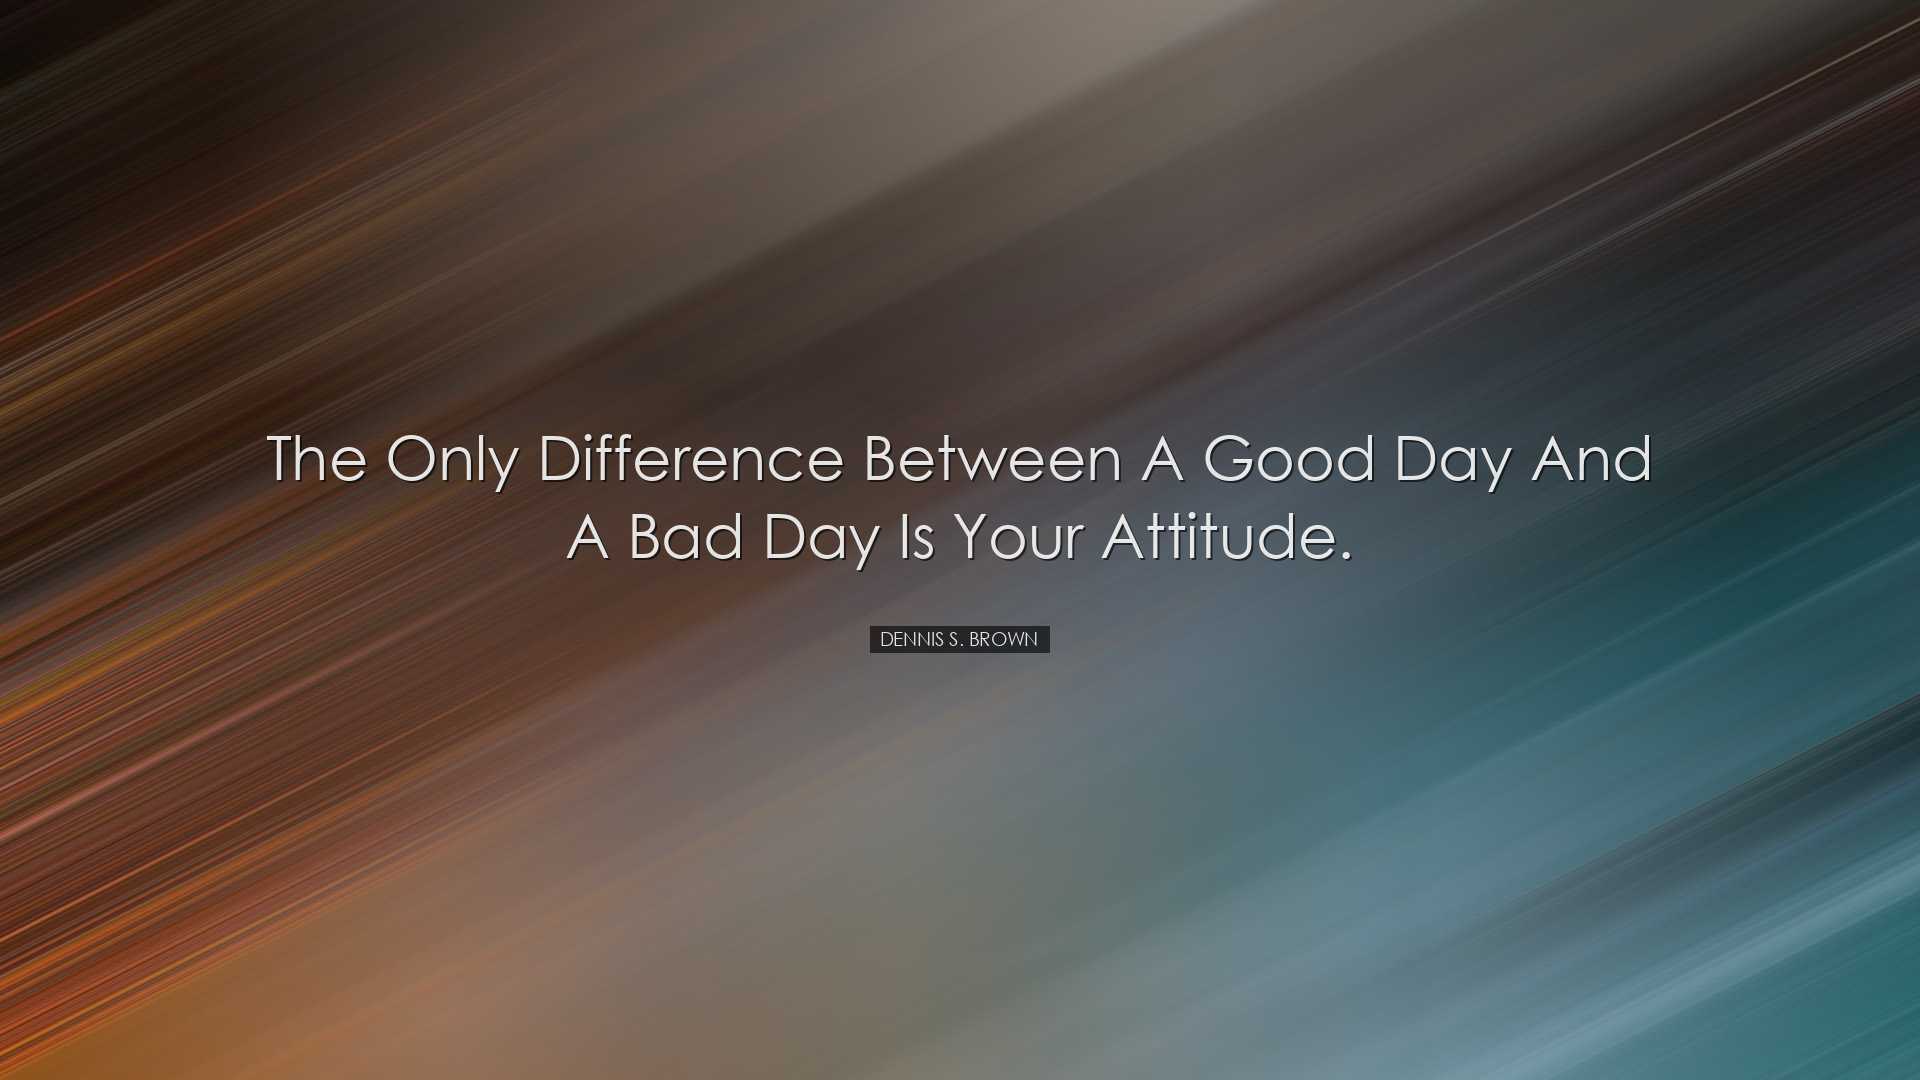 The only difference between a good day and a bad day is your attit